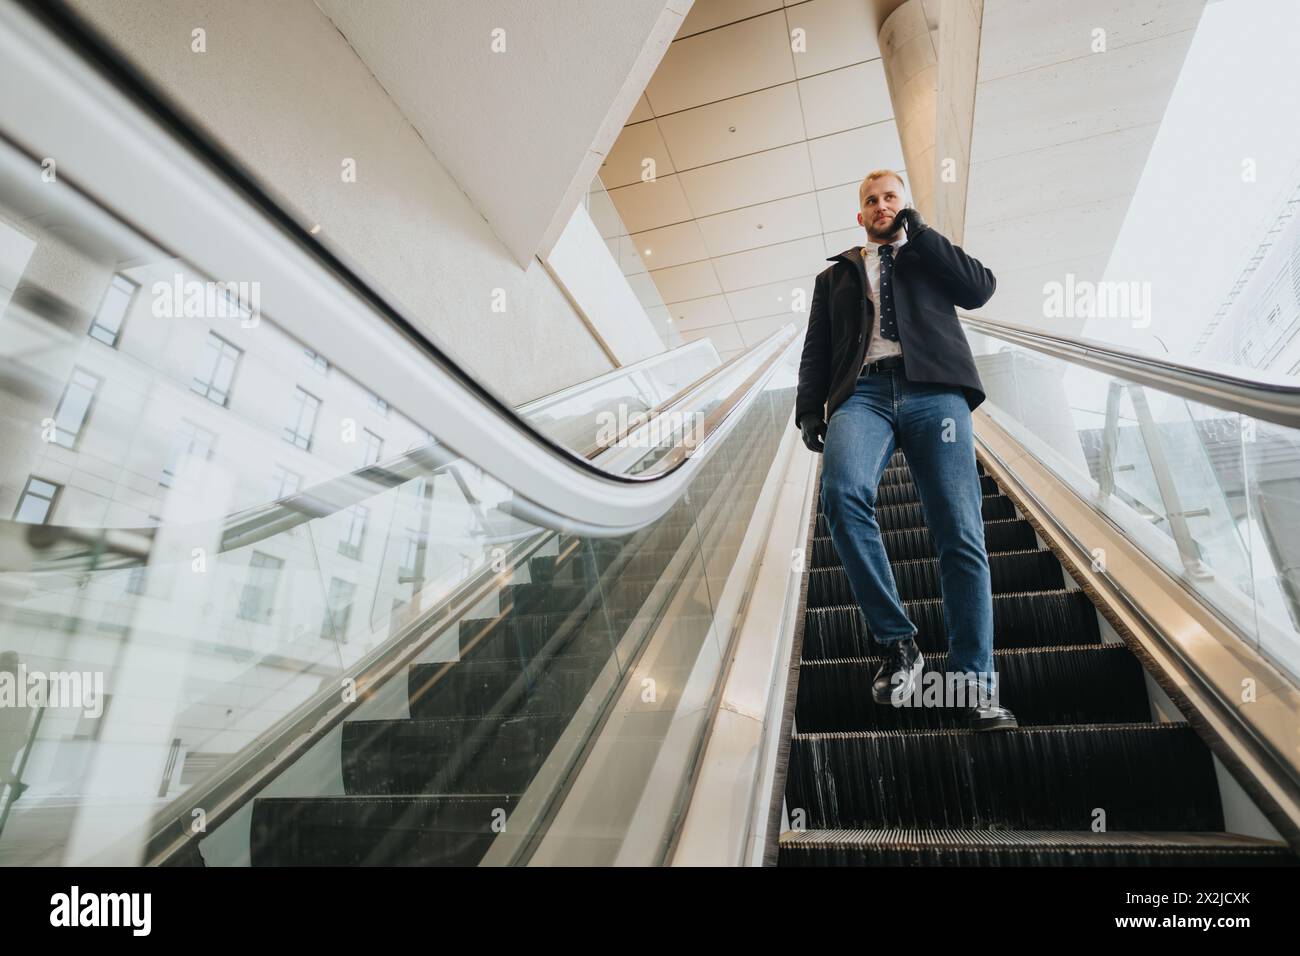 A businessman descends an escalator within a contemporary, airy corporate building, embodying efficiency and urban lifestyle. Stock Photo